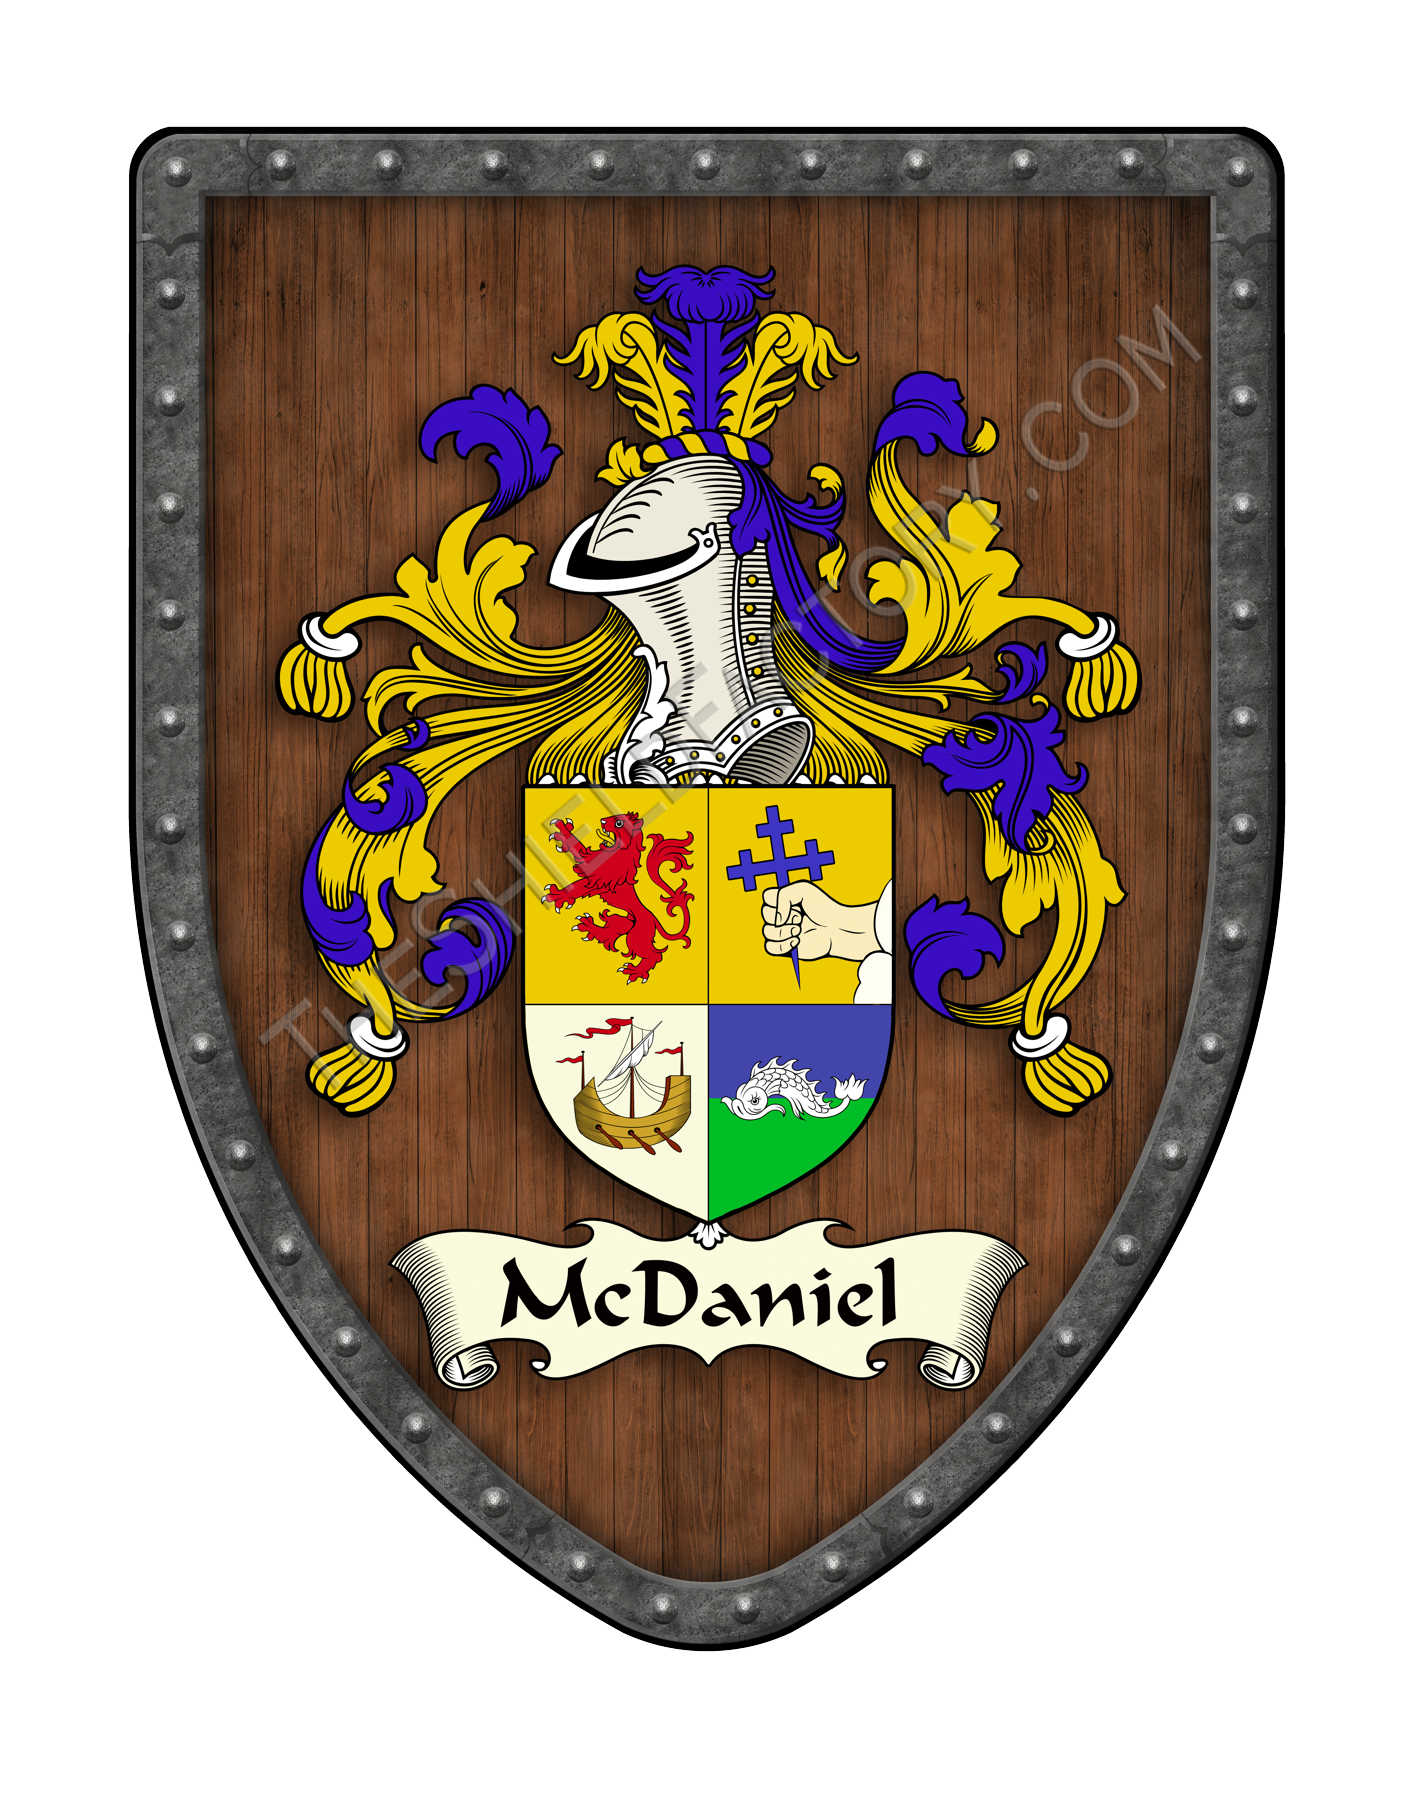 McDaniel Family Coat of Arms – My Family Coat Of Arms